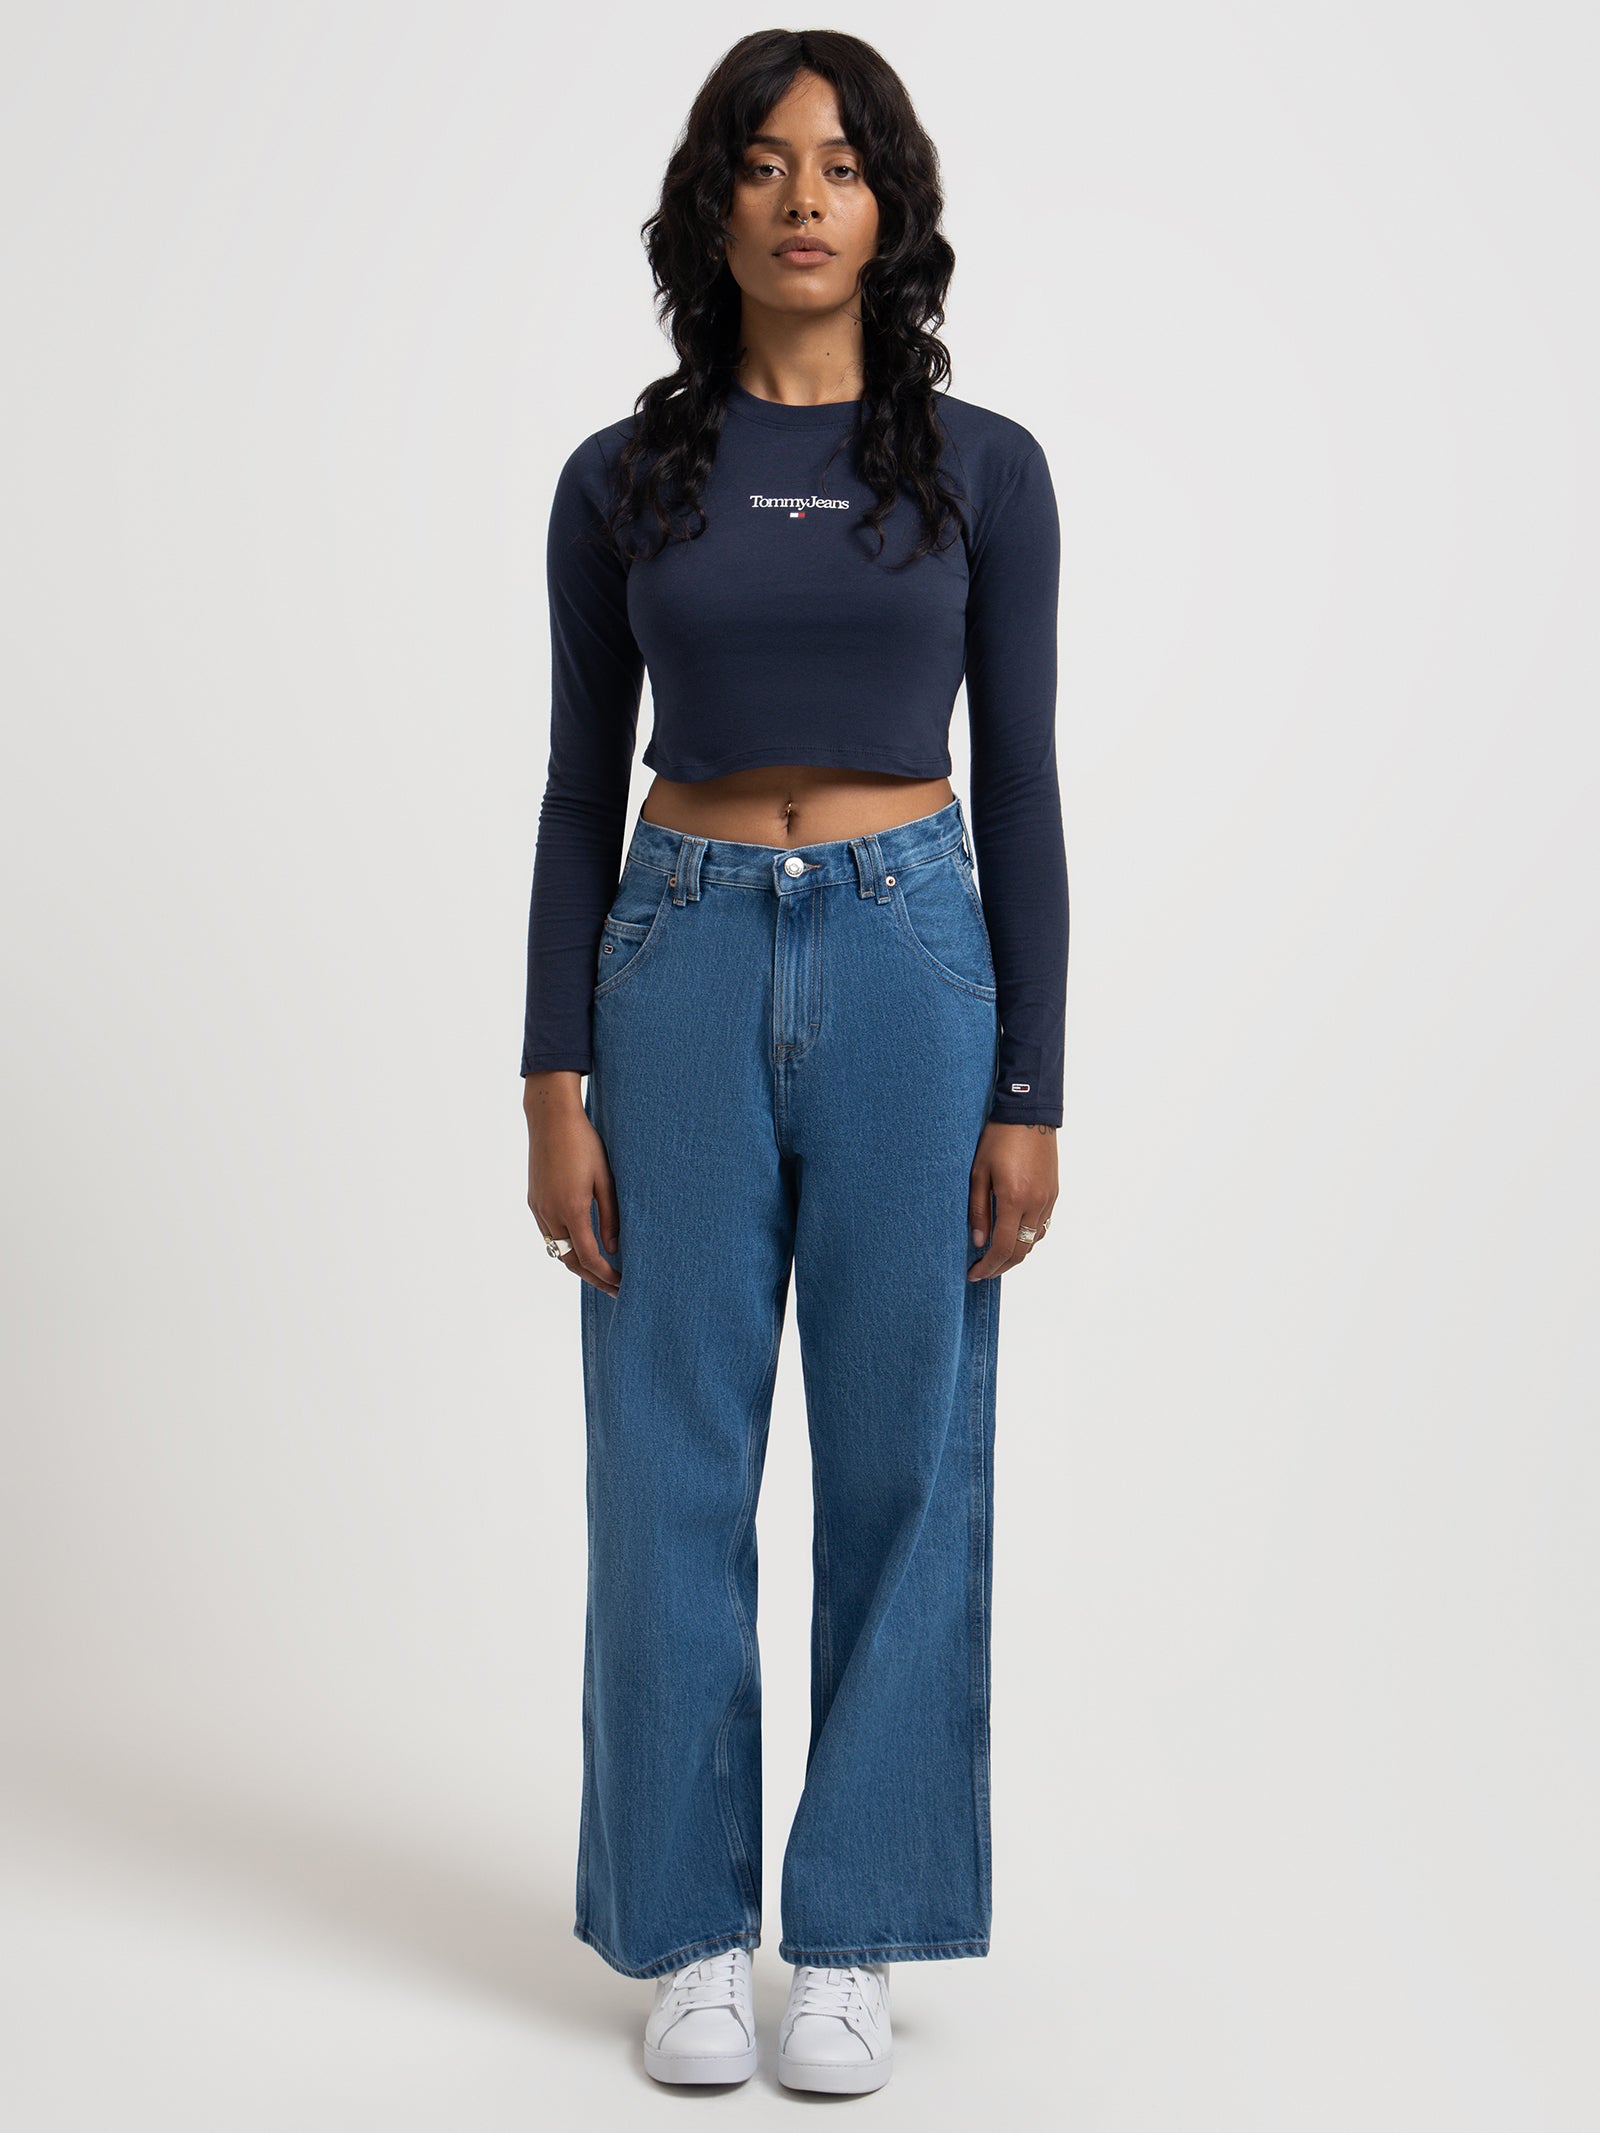 Daisy Low Rise Baggy Jeans in Denim - Glue Store